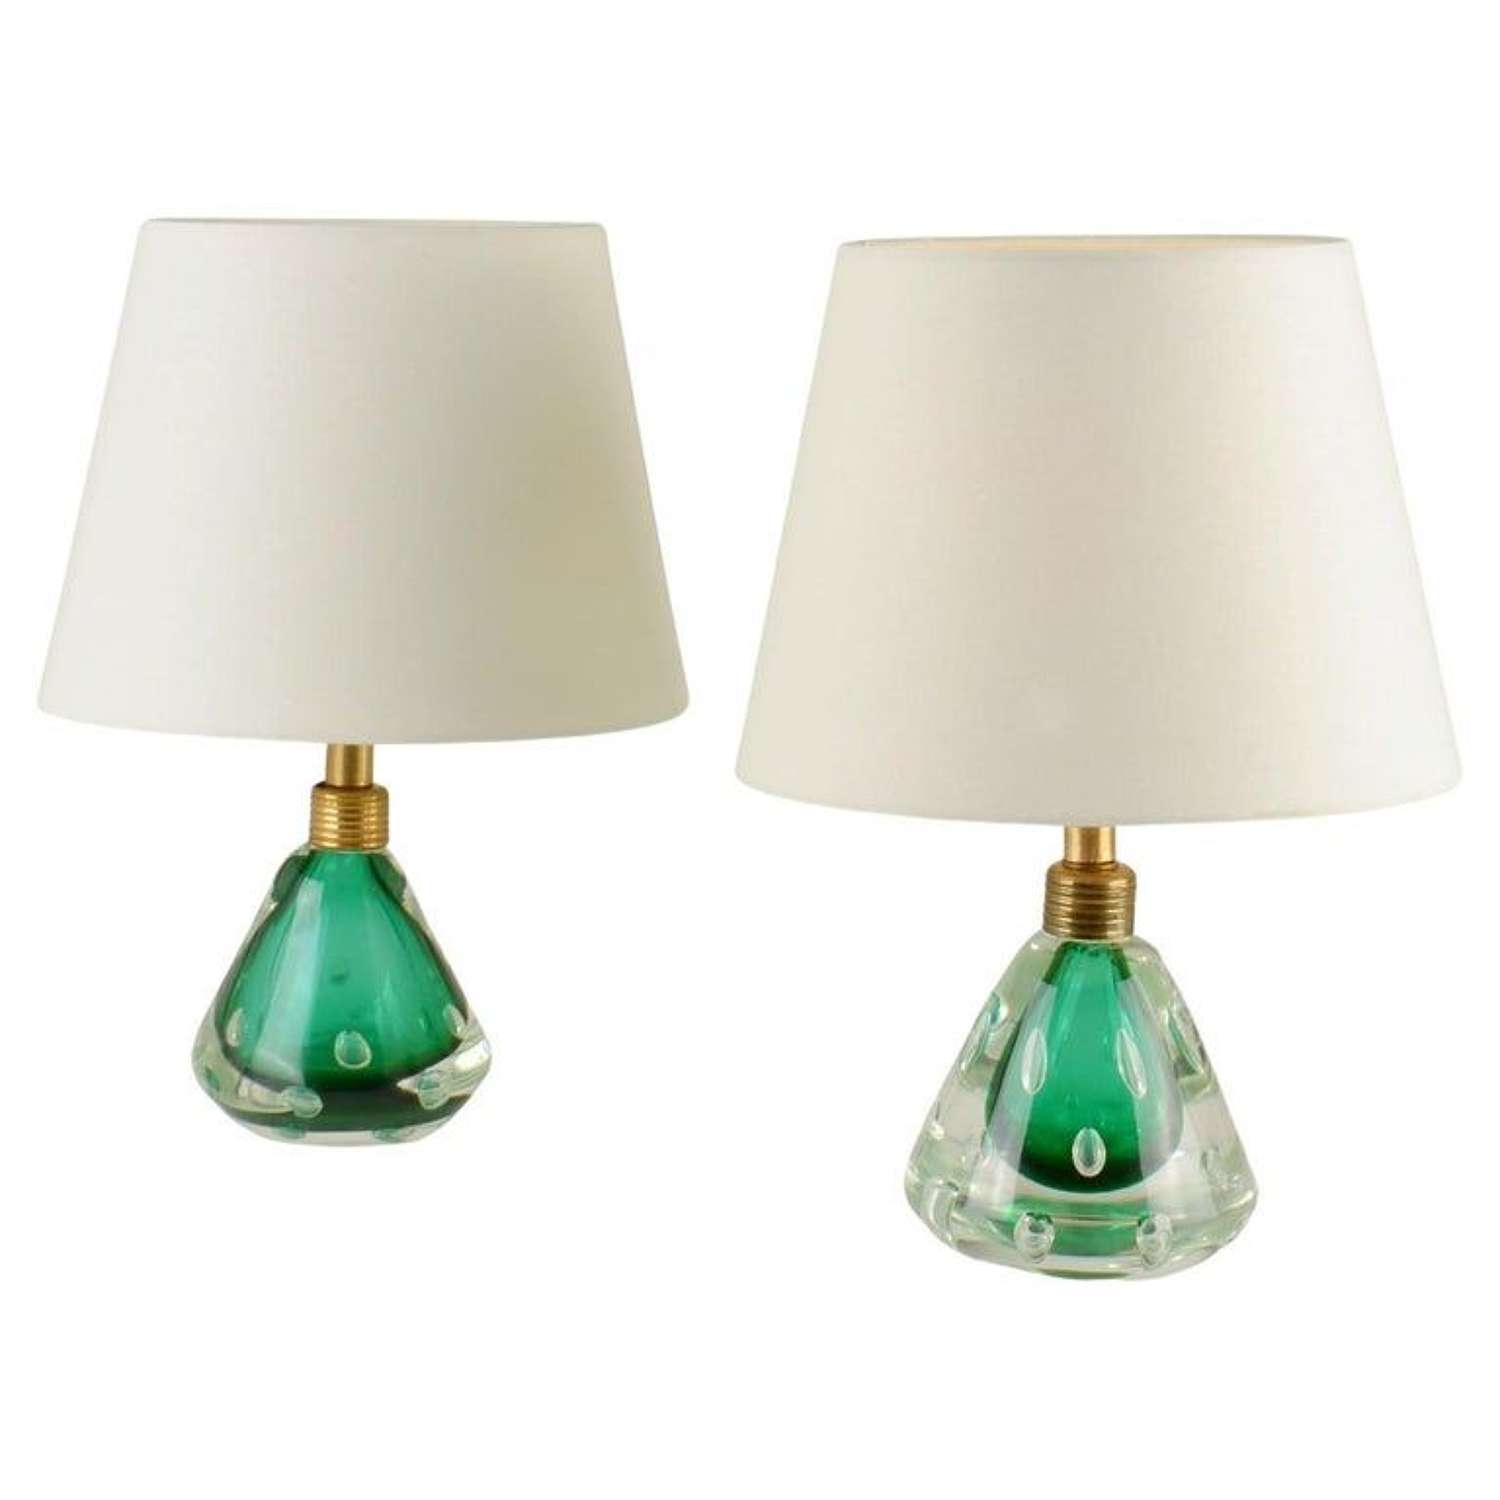 Pair Emerald Green Murano Sommerso Glass Table Lamps by Seguso 1950's